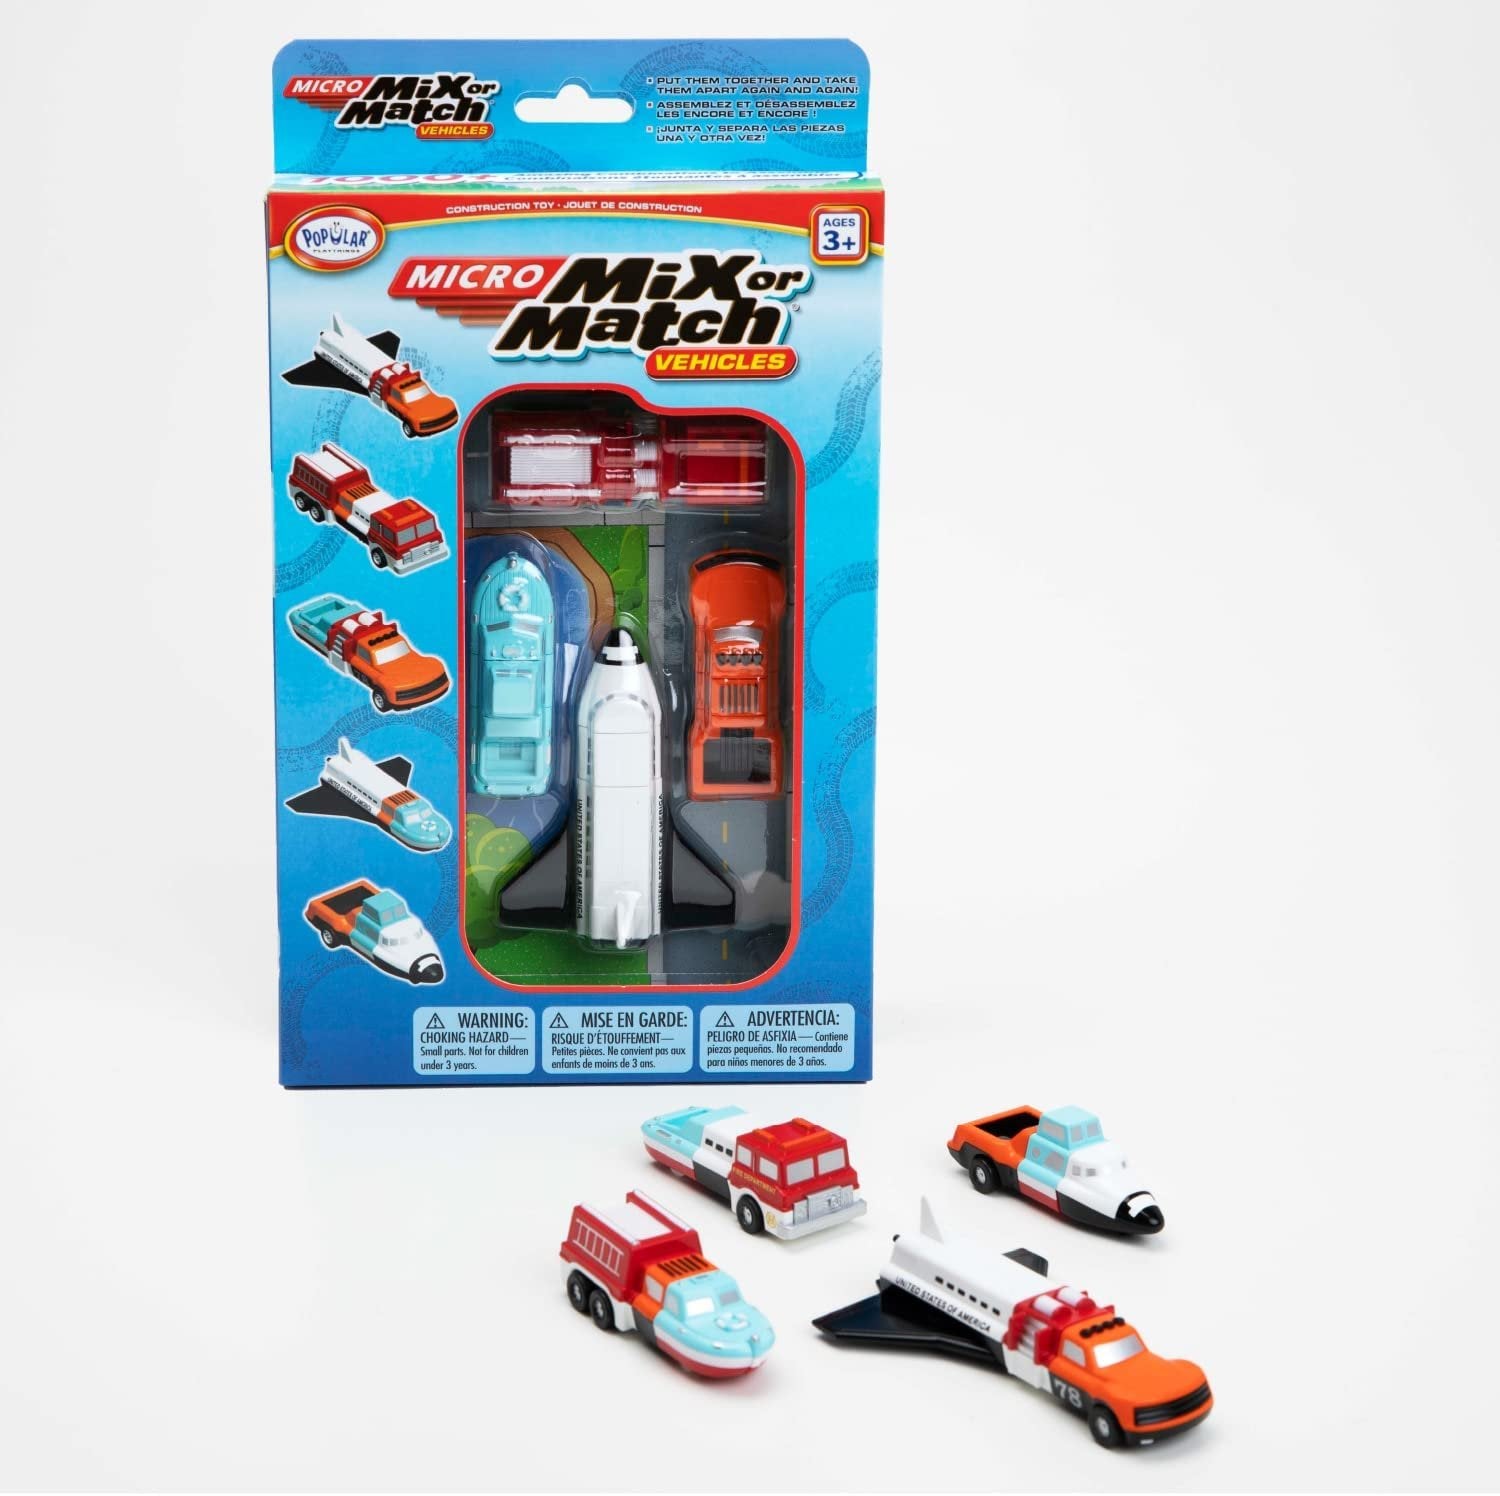 MICRO MIXD OR MATCH VEHICLES 1